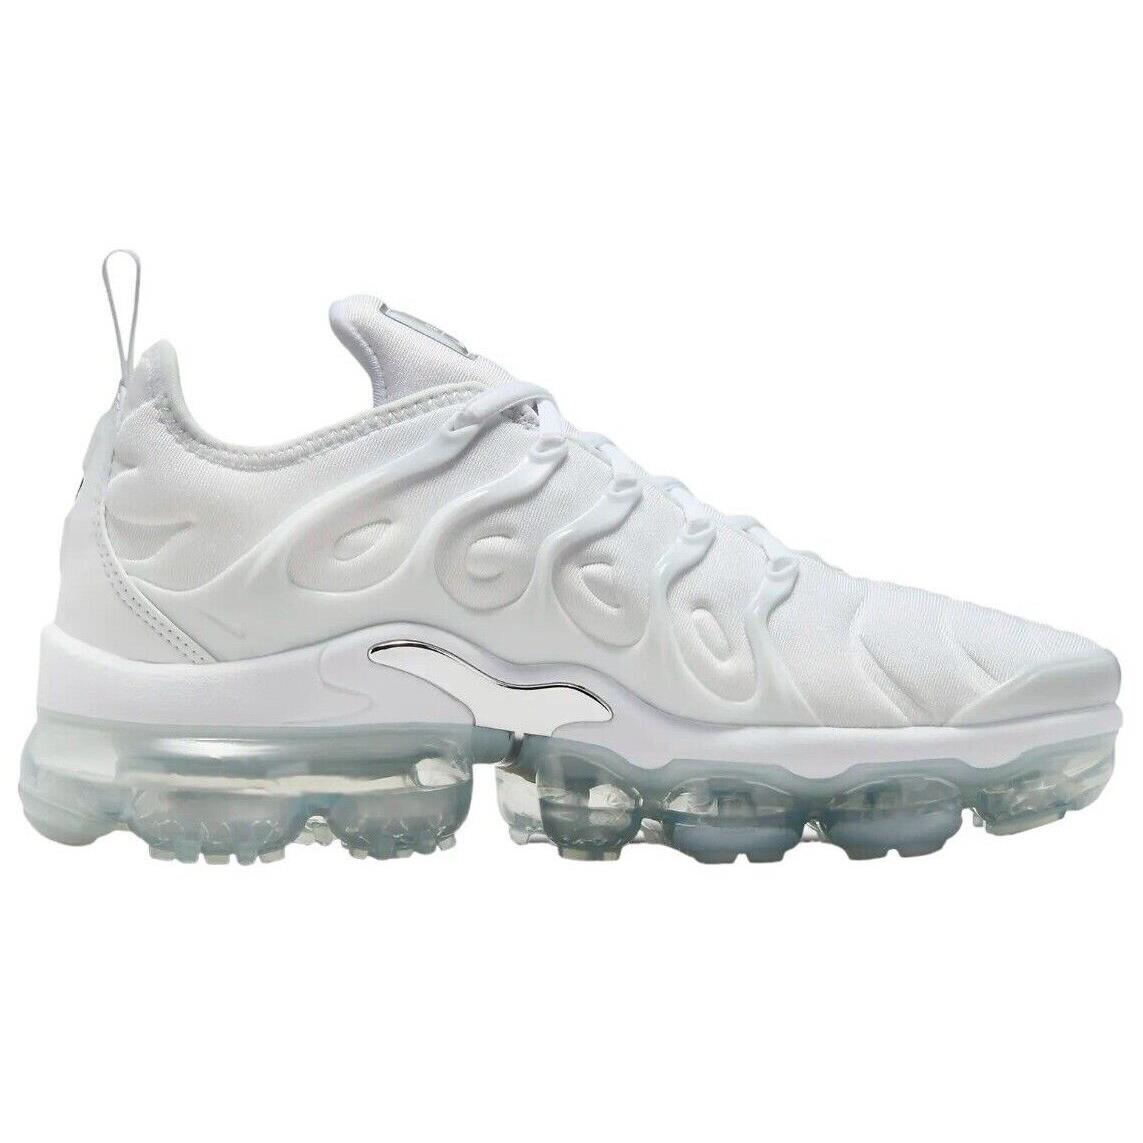 Nike Air Vapormax Plus Women`s Running Shoes All Colors US Sizes 6-11 White/Metallic Silver